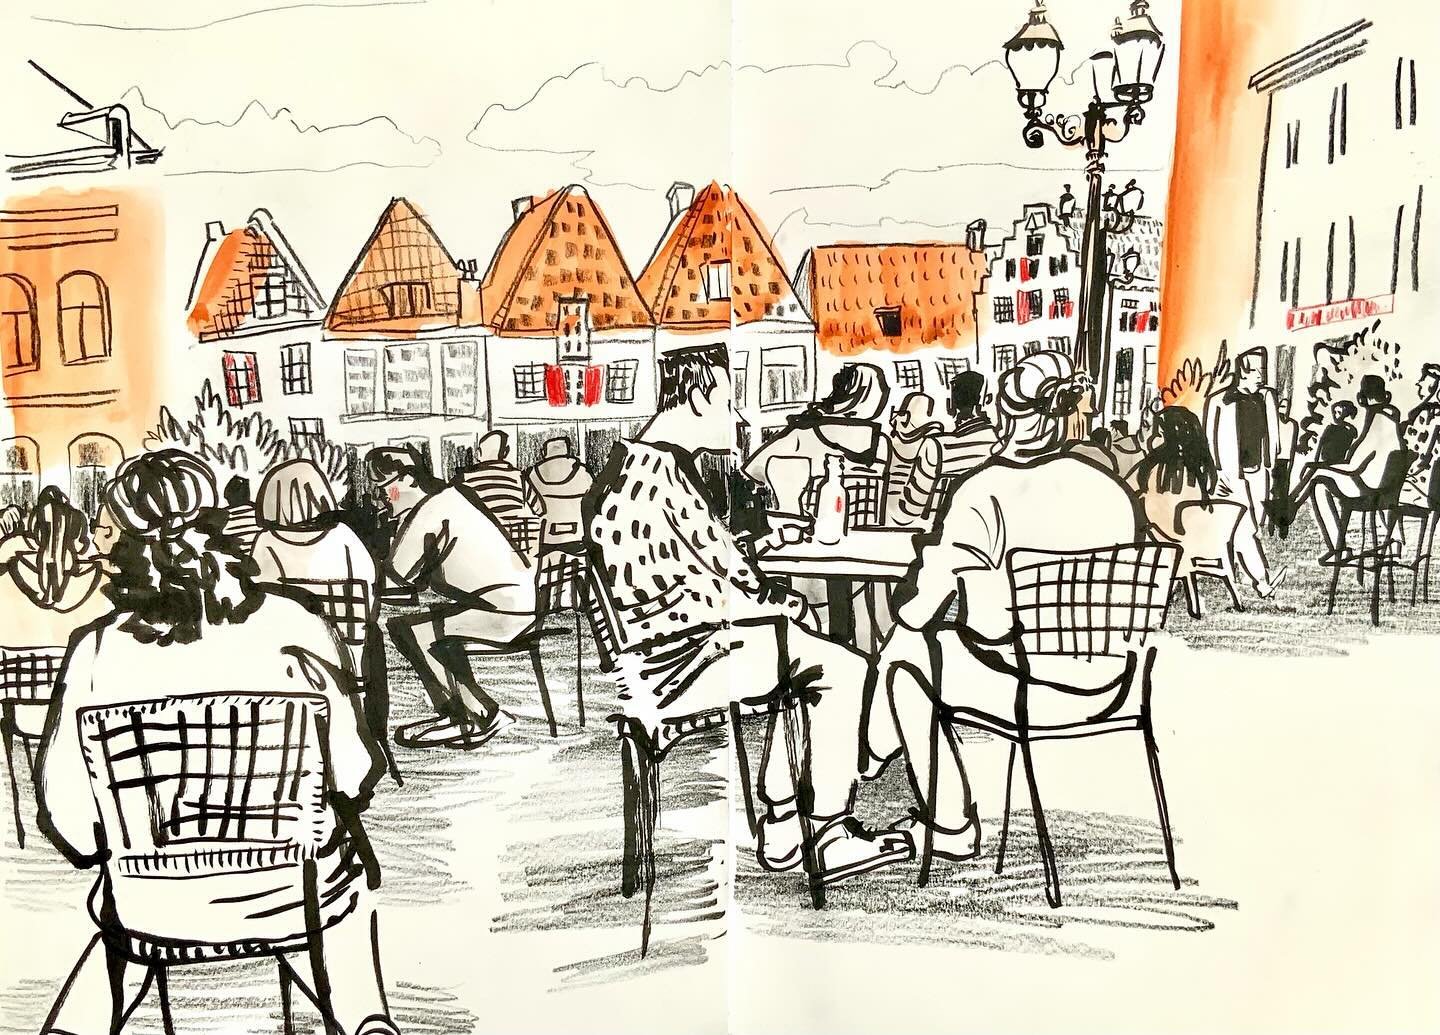 A sunny Sunday afternoon in Amersfoort with sketch pals @gertrudesteenbeek @martinedegraaff and @kittyvdheuvel 

As we were sketching at the @baristacafeamersfoort terrace (a mix of coffee, cake, lunch and art supplies on the table), part of the fest